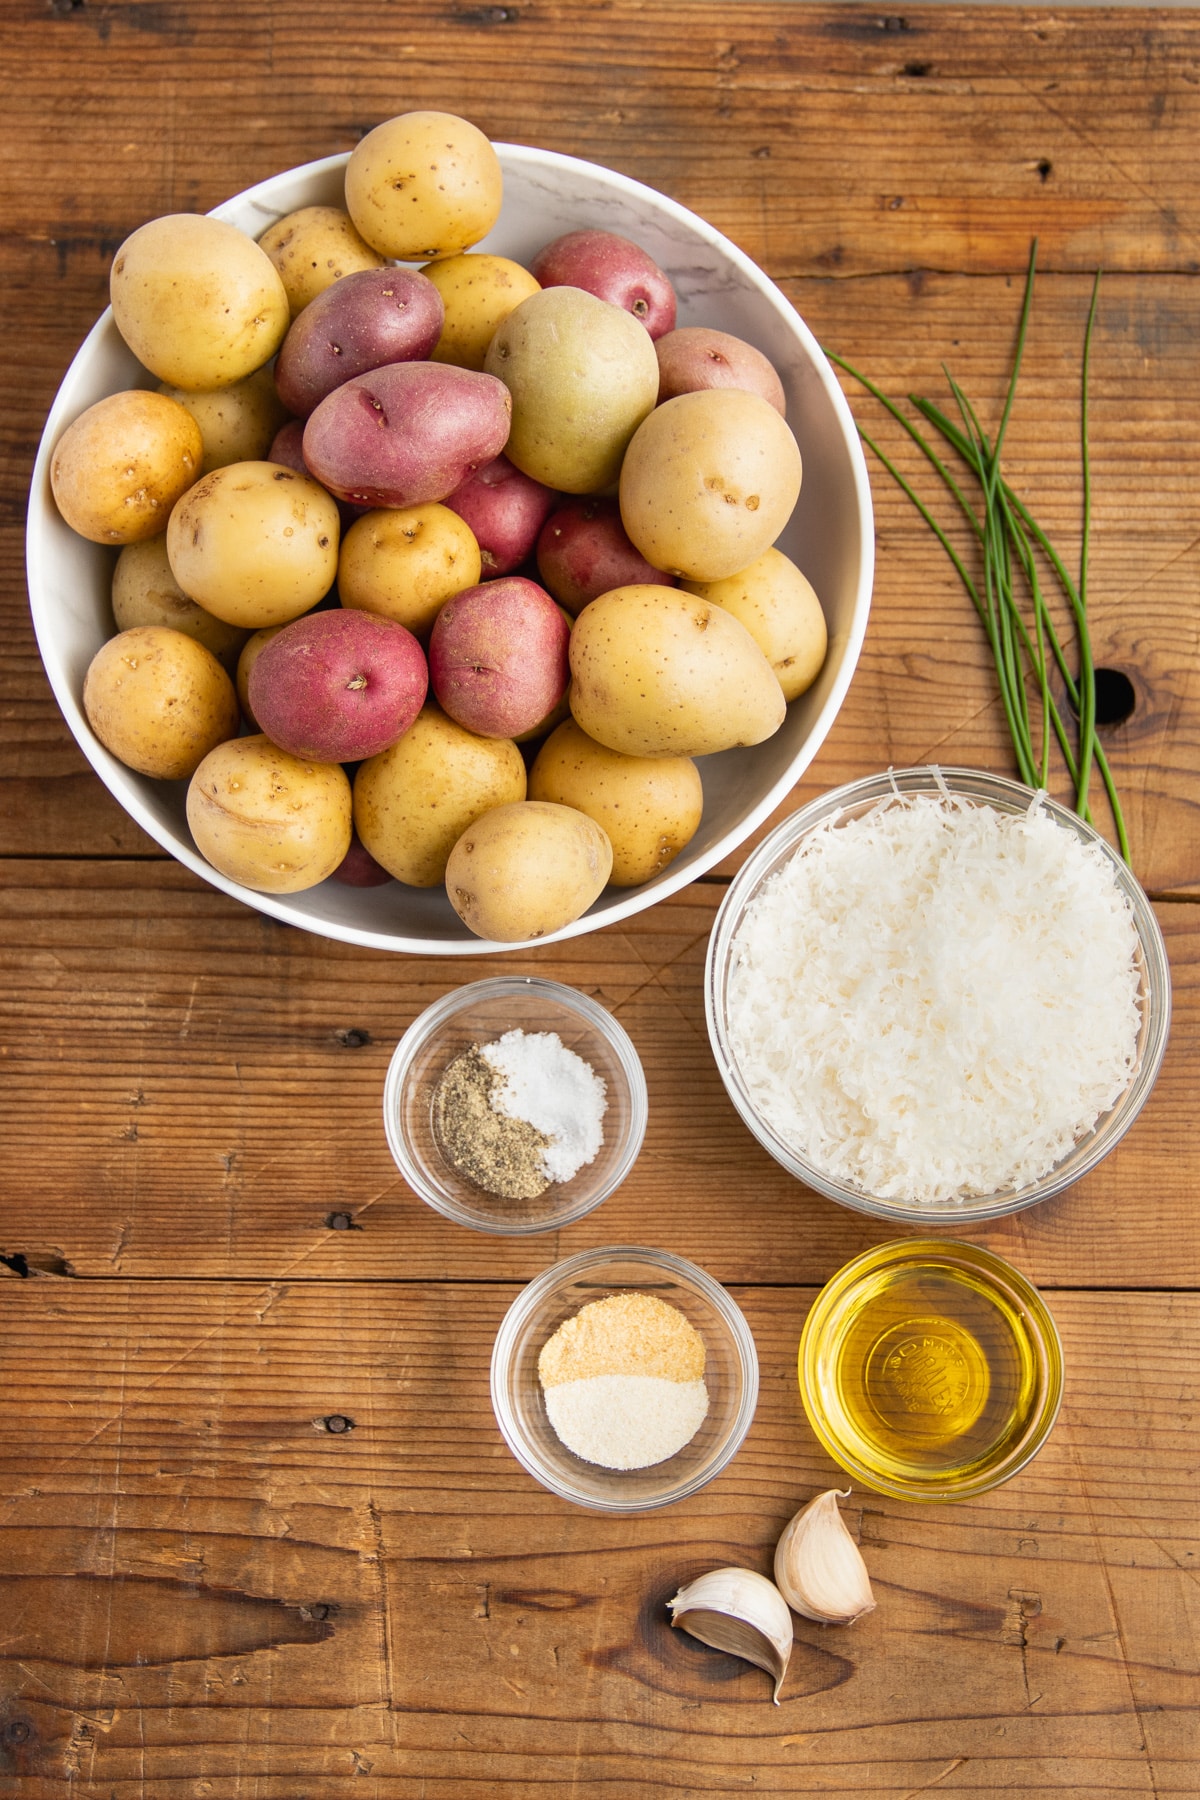 This is a picture of all the ingredients needed to make air fryer parmesan potatoes.